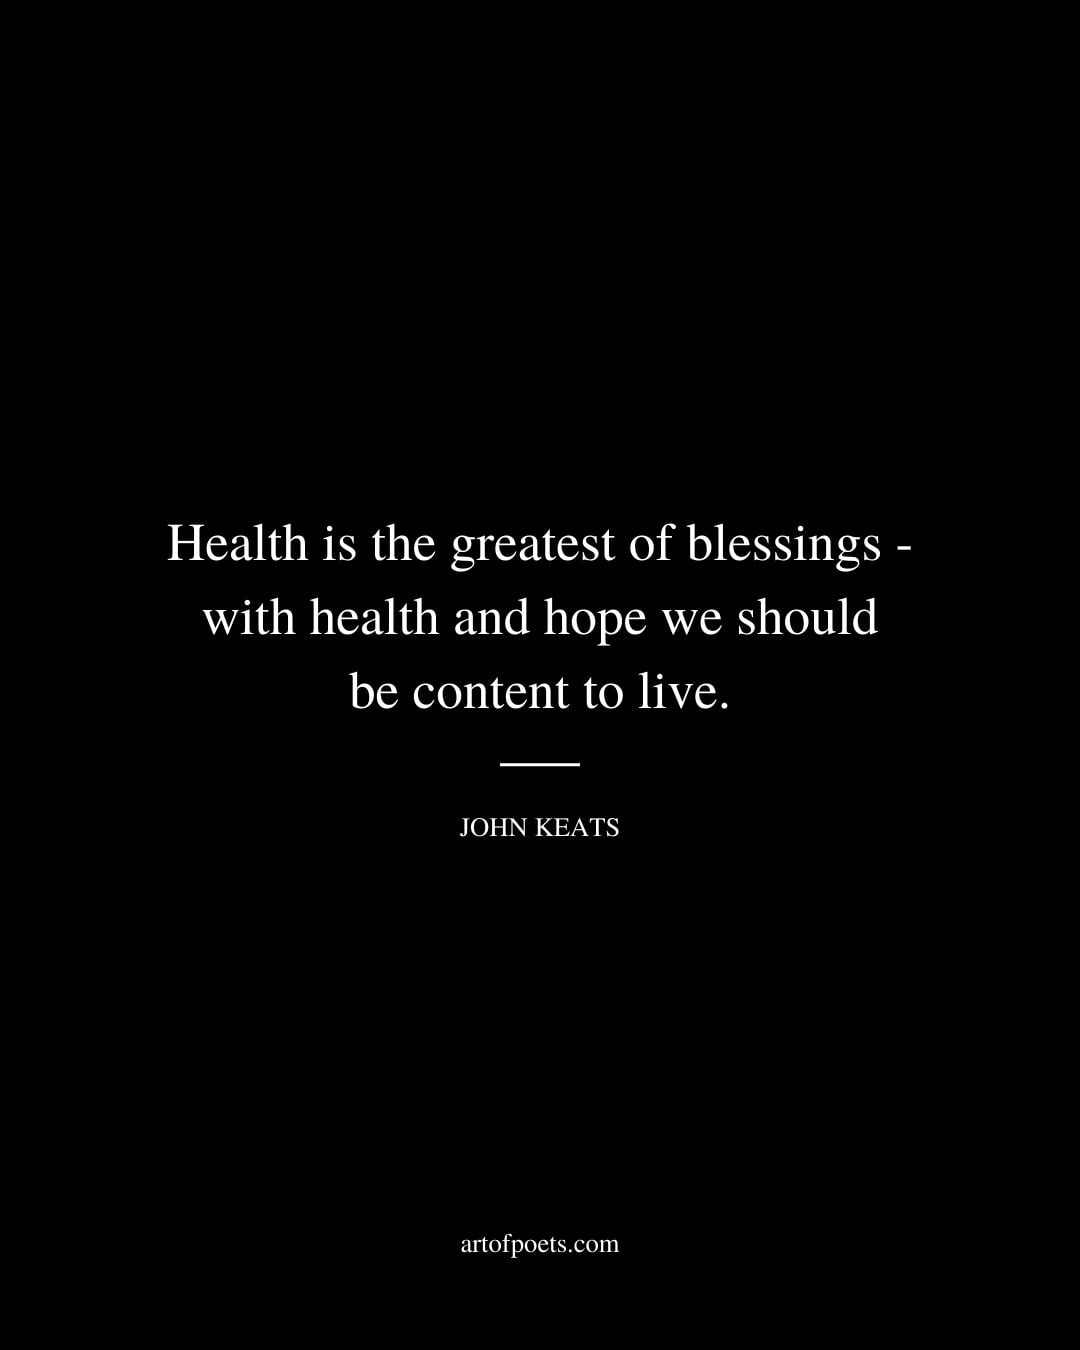 Health is the greatest of blessings – with health and hope we should be content to live. John Keats